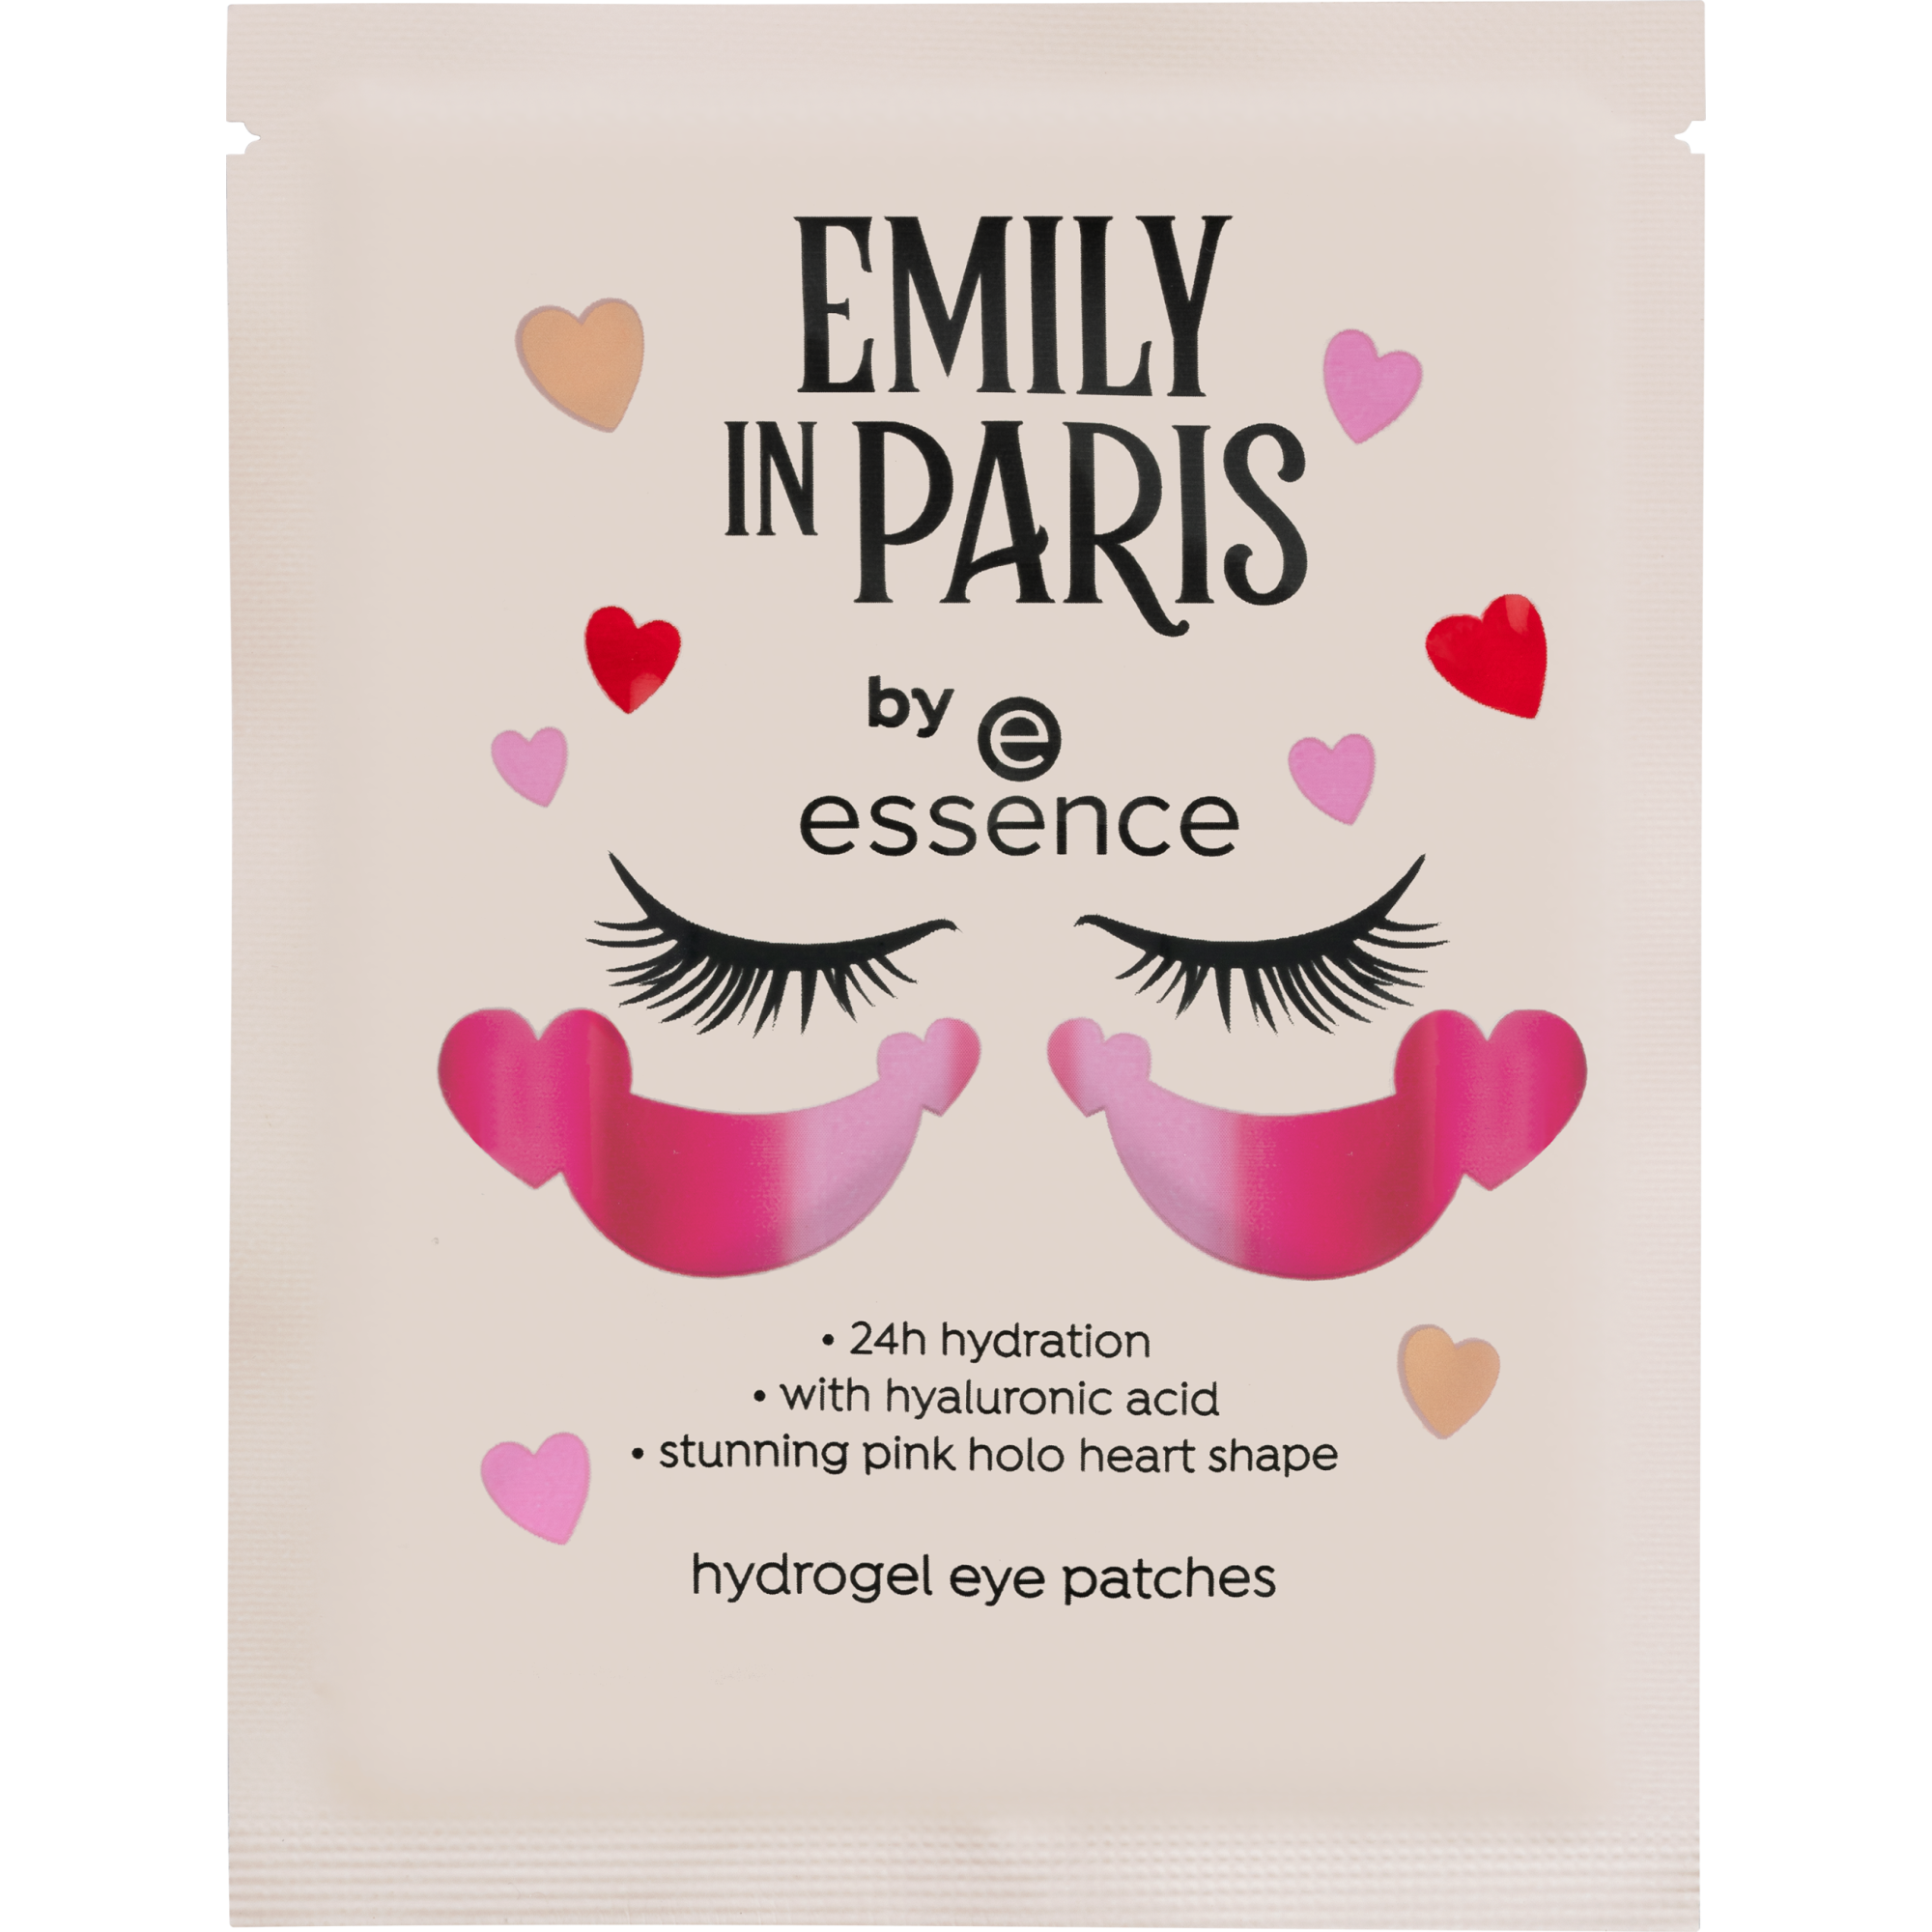 essence EMILY IN PARIS by essence hydrogel eye patches